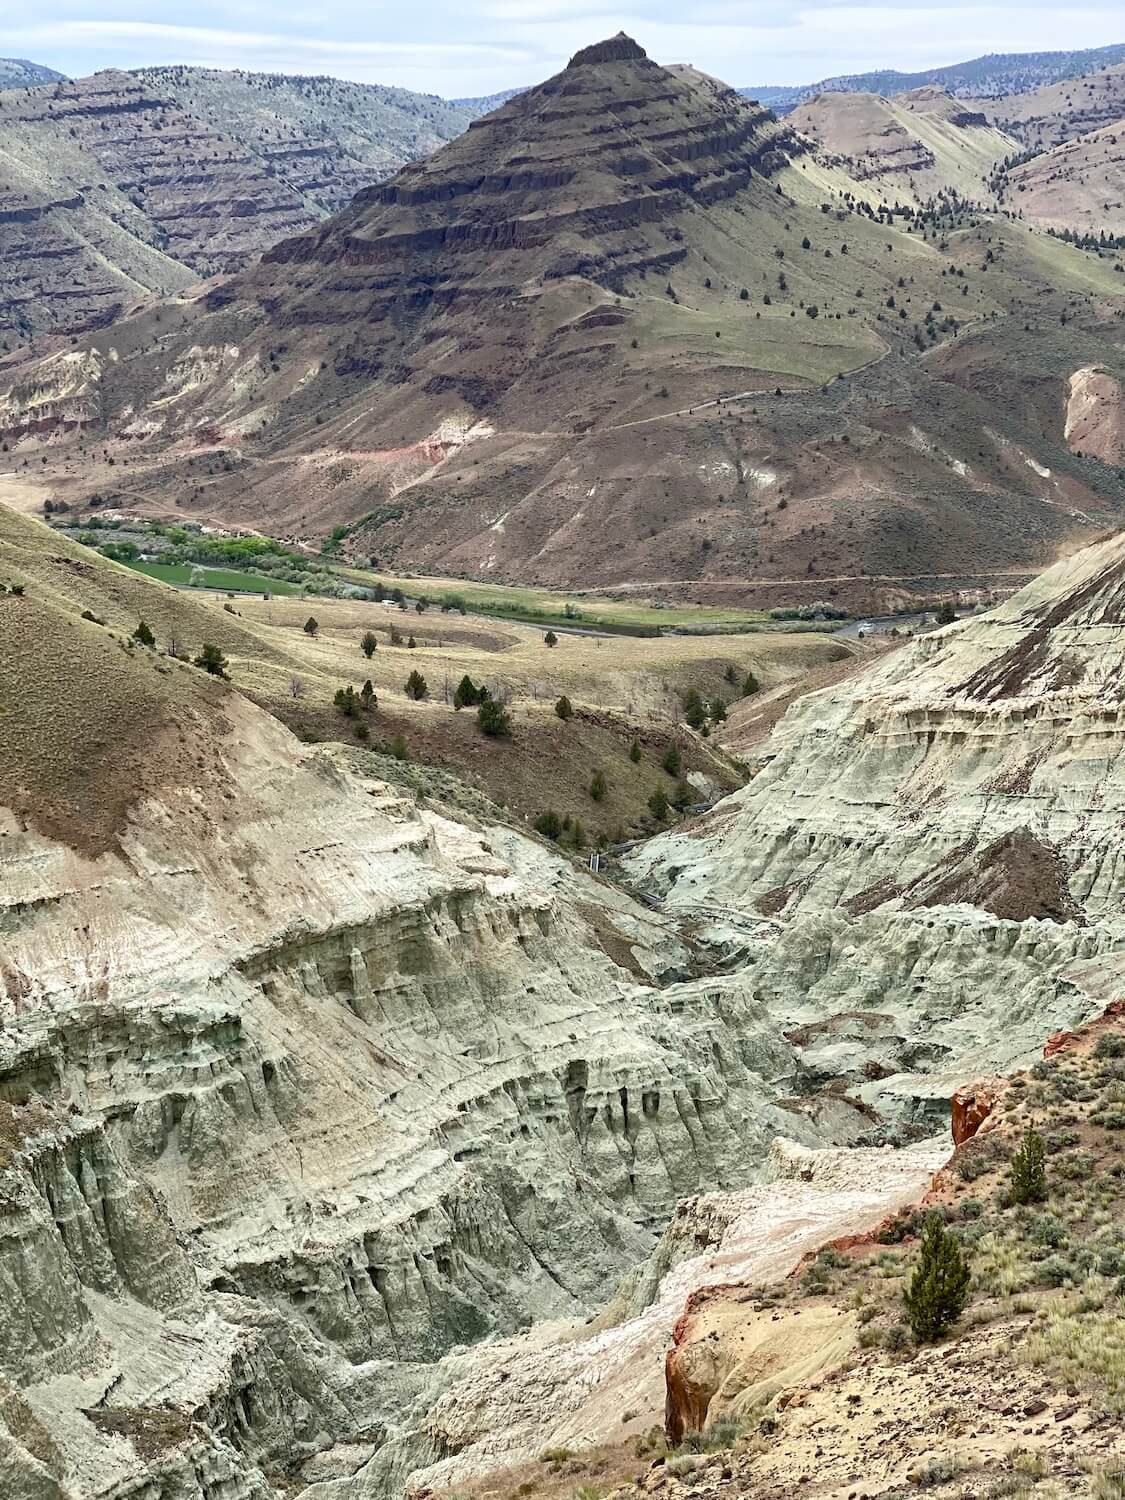 The Blue Basin Overlook trail in the John Day Fossil Bed National Monument looks out over blue ridges of chalky canyon formed millions of years ago. There is a layered canyon ridge in the background.